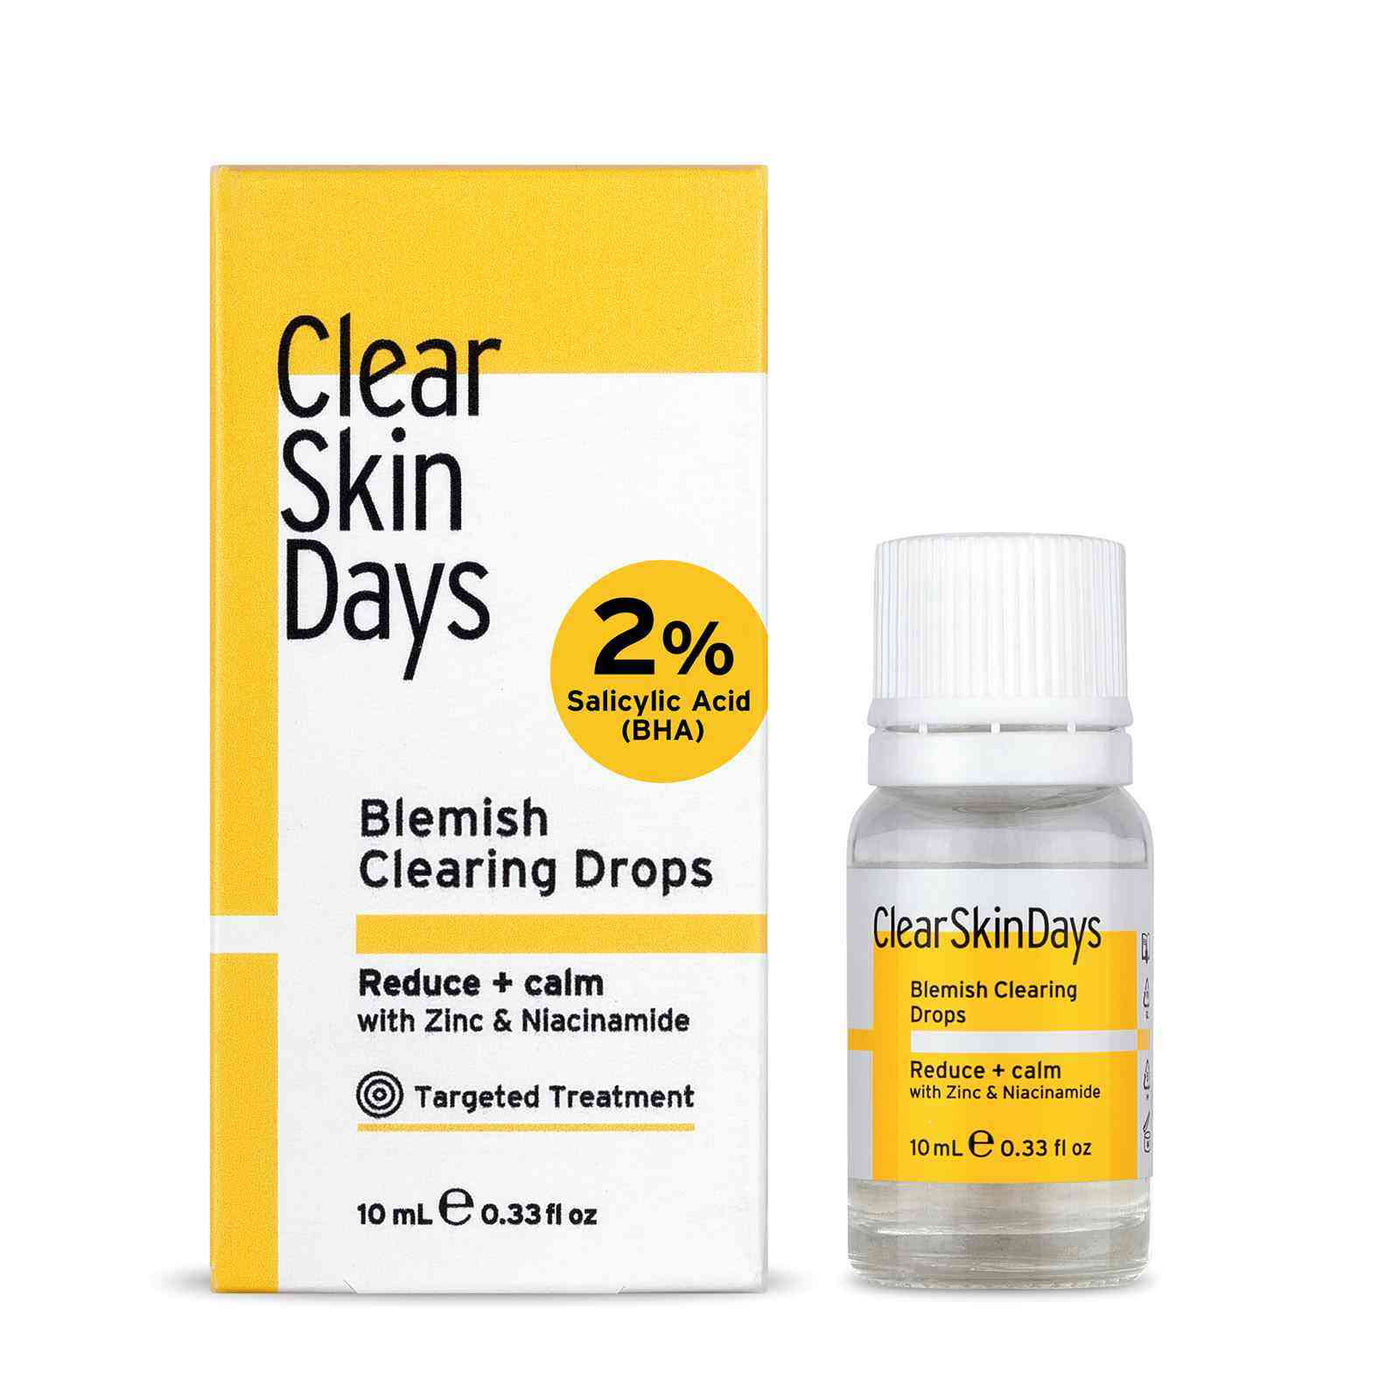 Blemish Clearing Drops